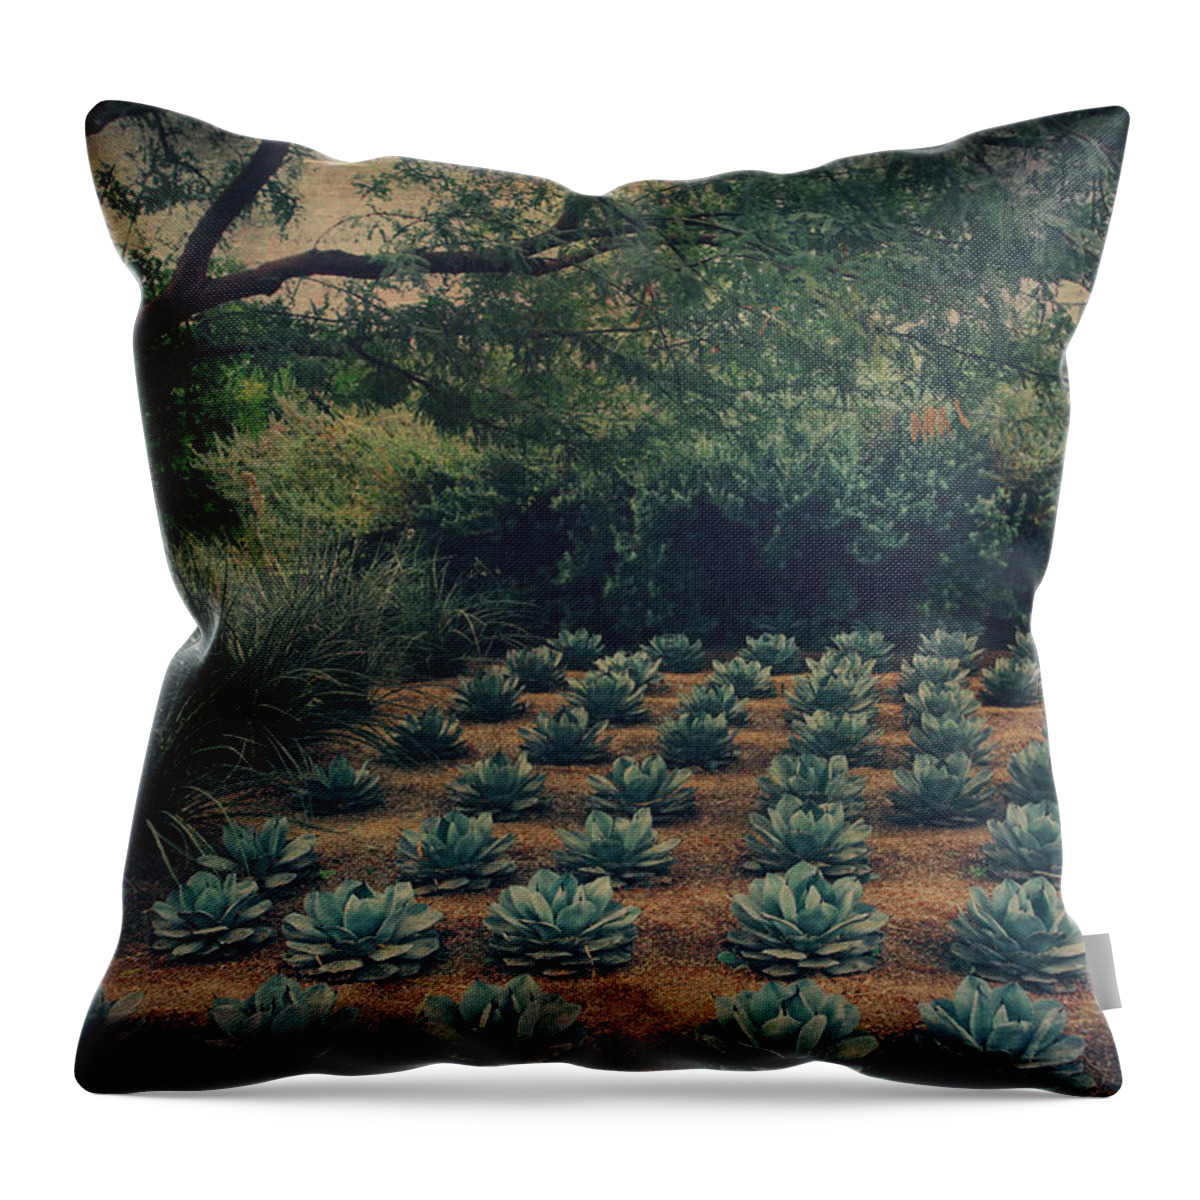 Sunnylands Center And Gardens Throw Pillow featuring the photograph Order by Laurie Search